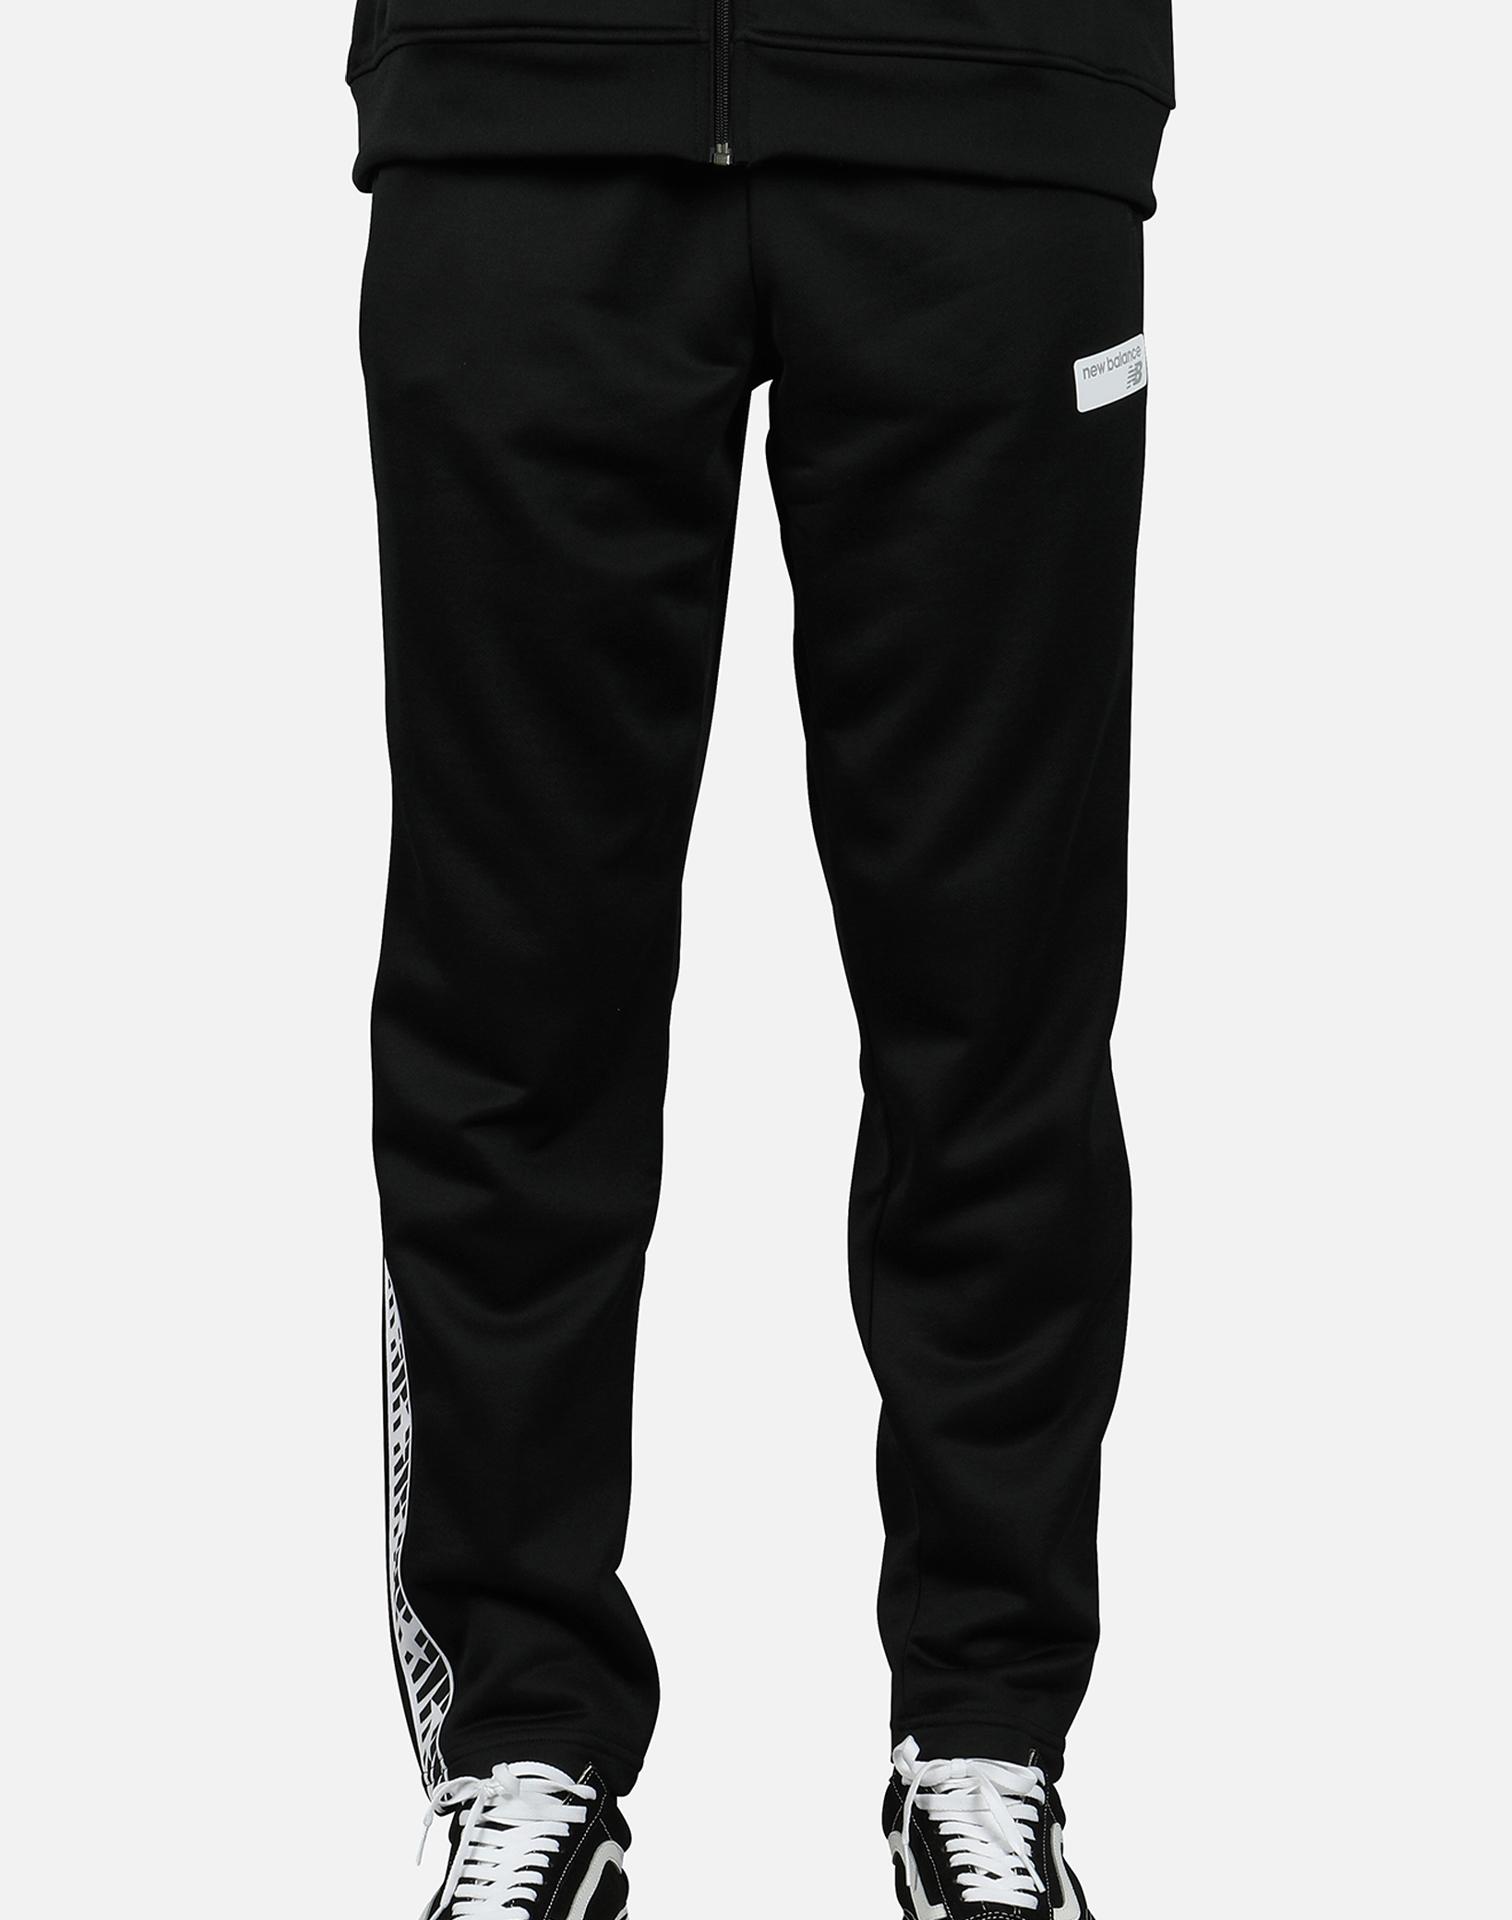 New Balance Nb Athletics Classic Track Pants in Black for Men - Lyst